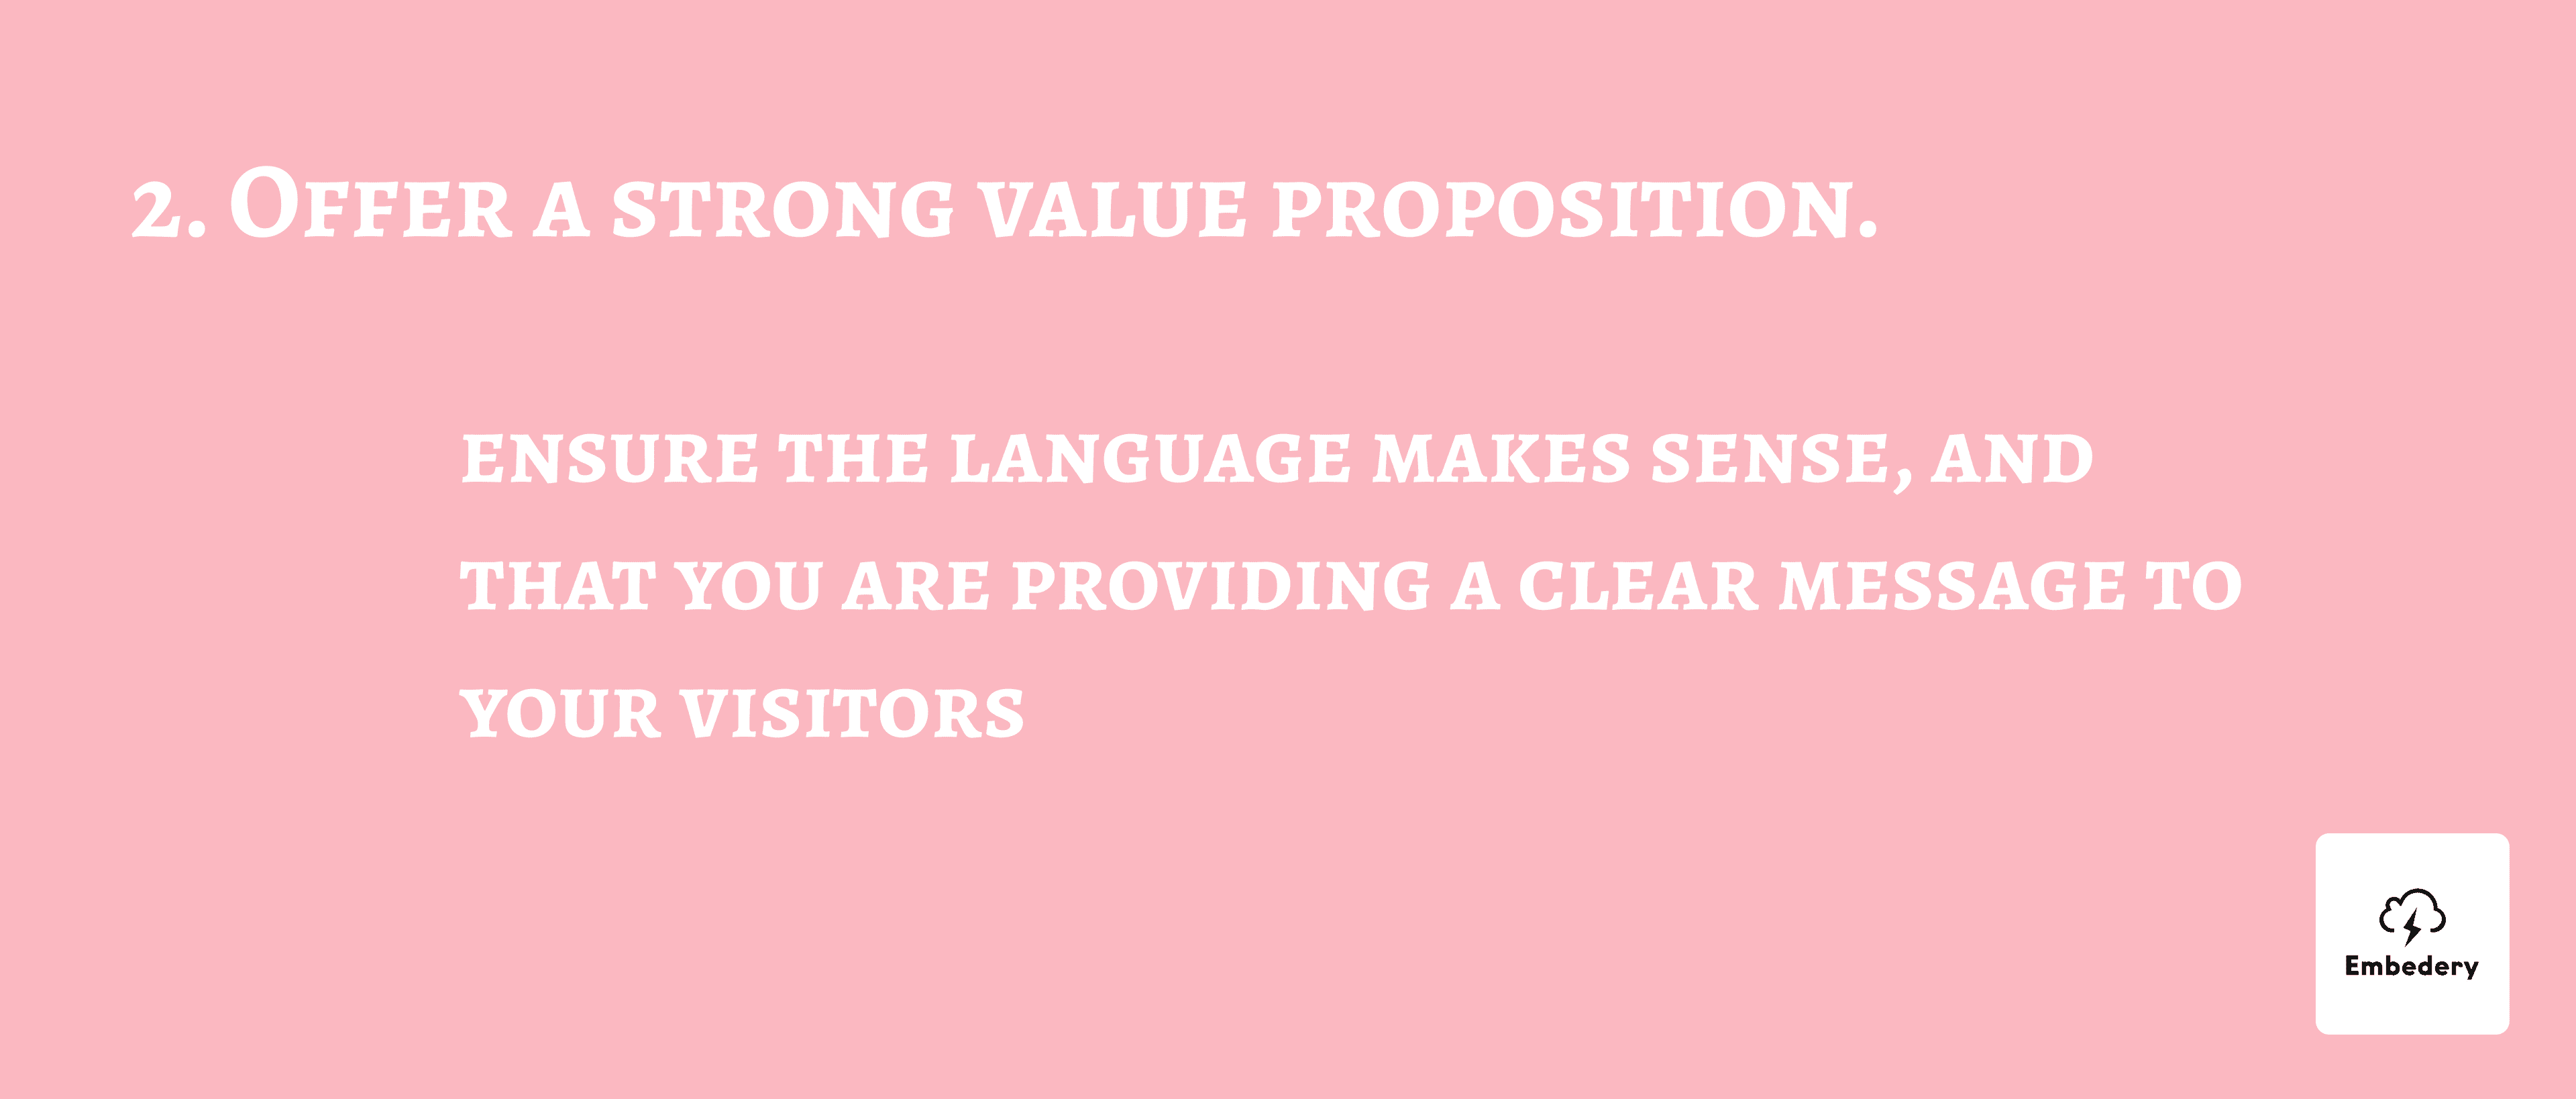 Offer a strong value proposition